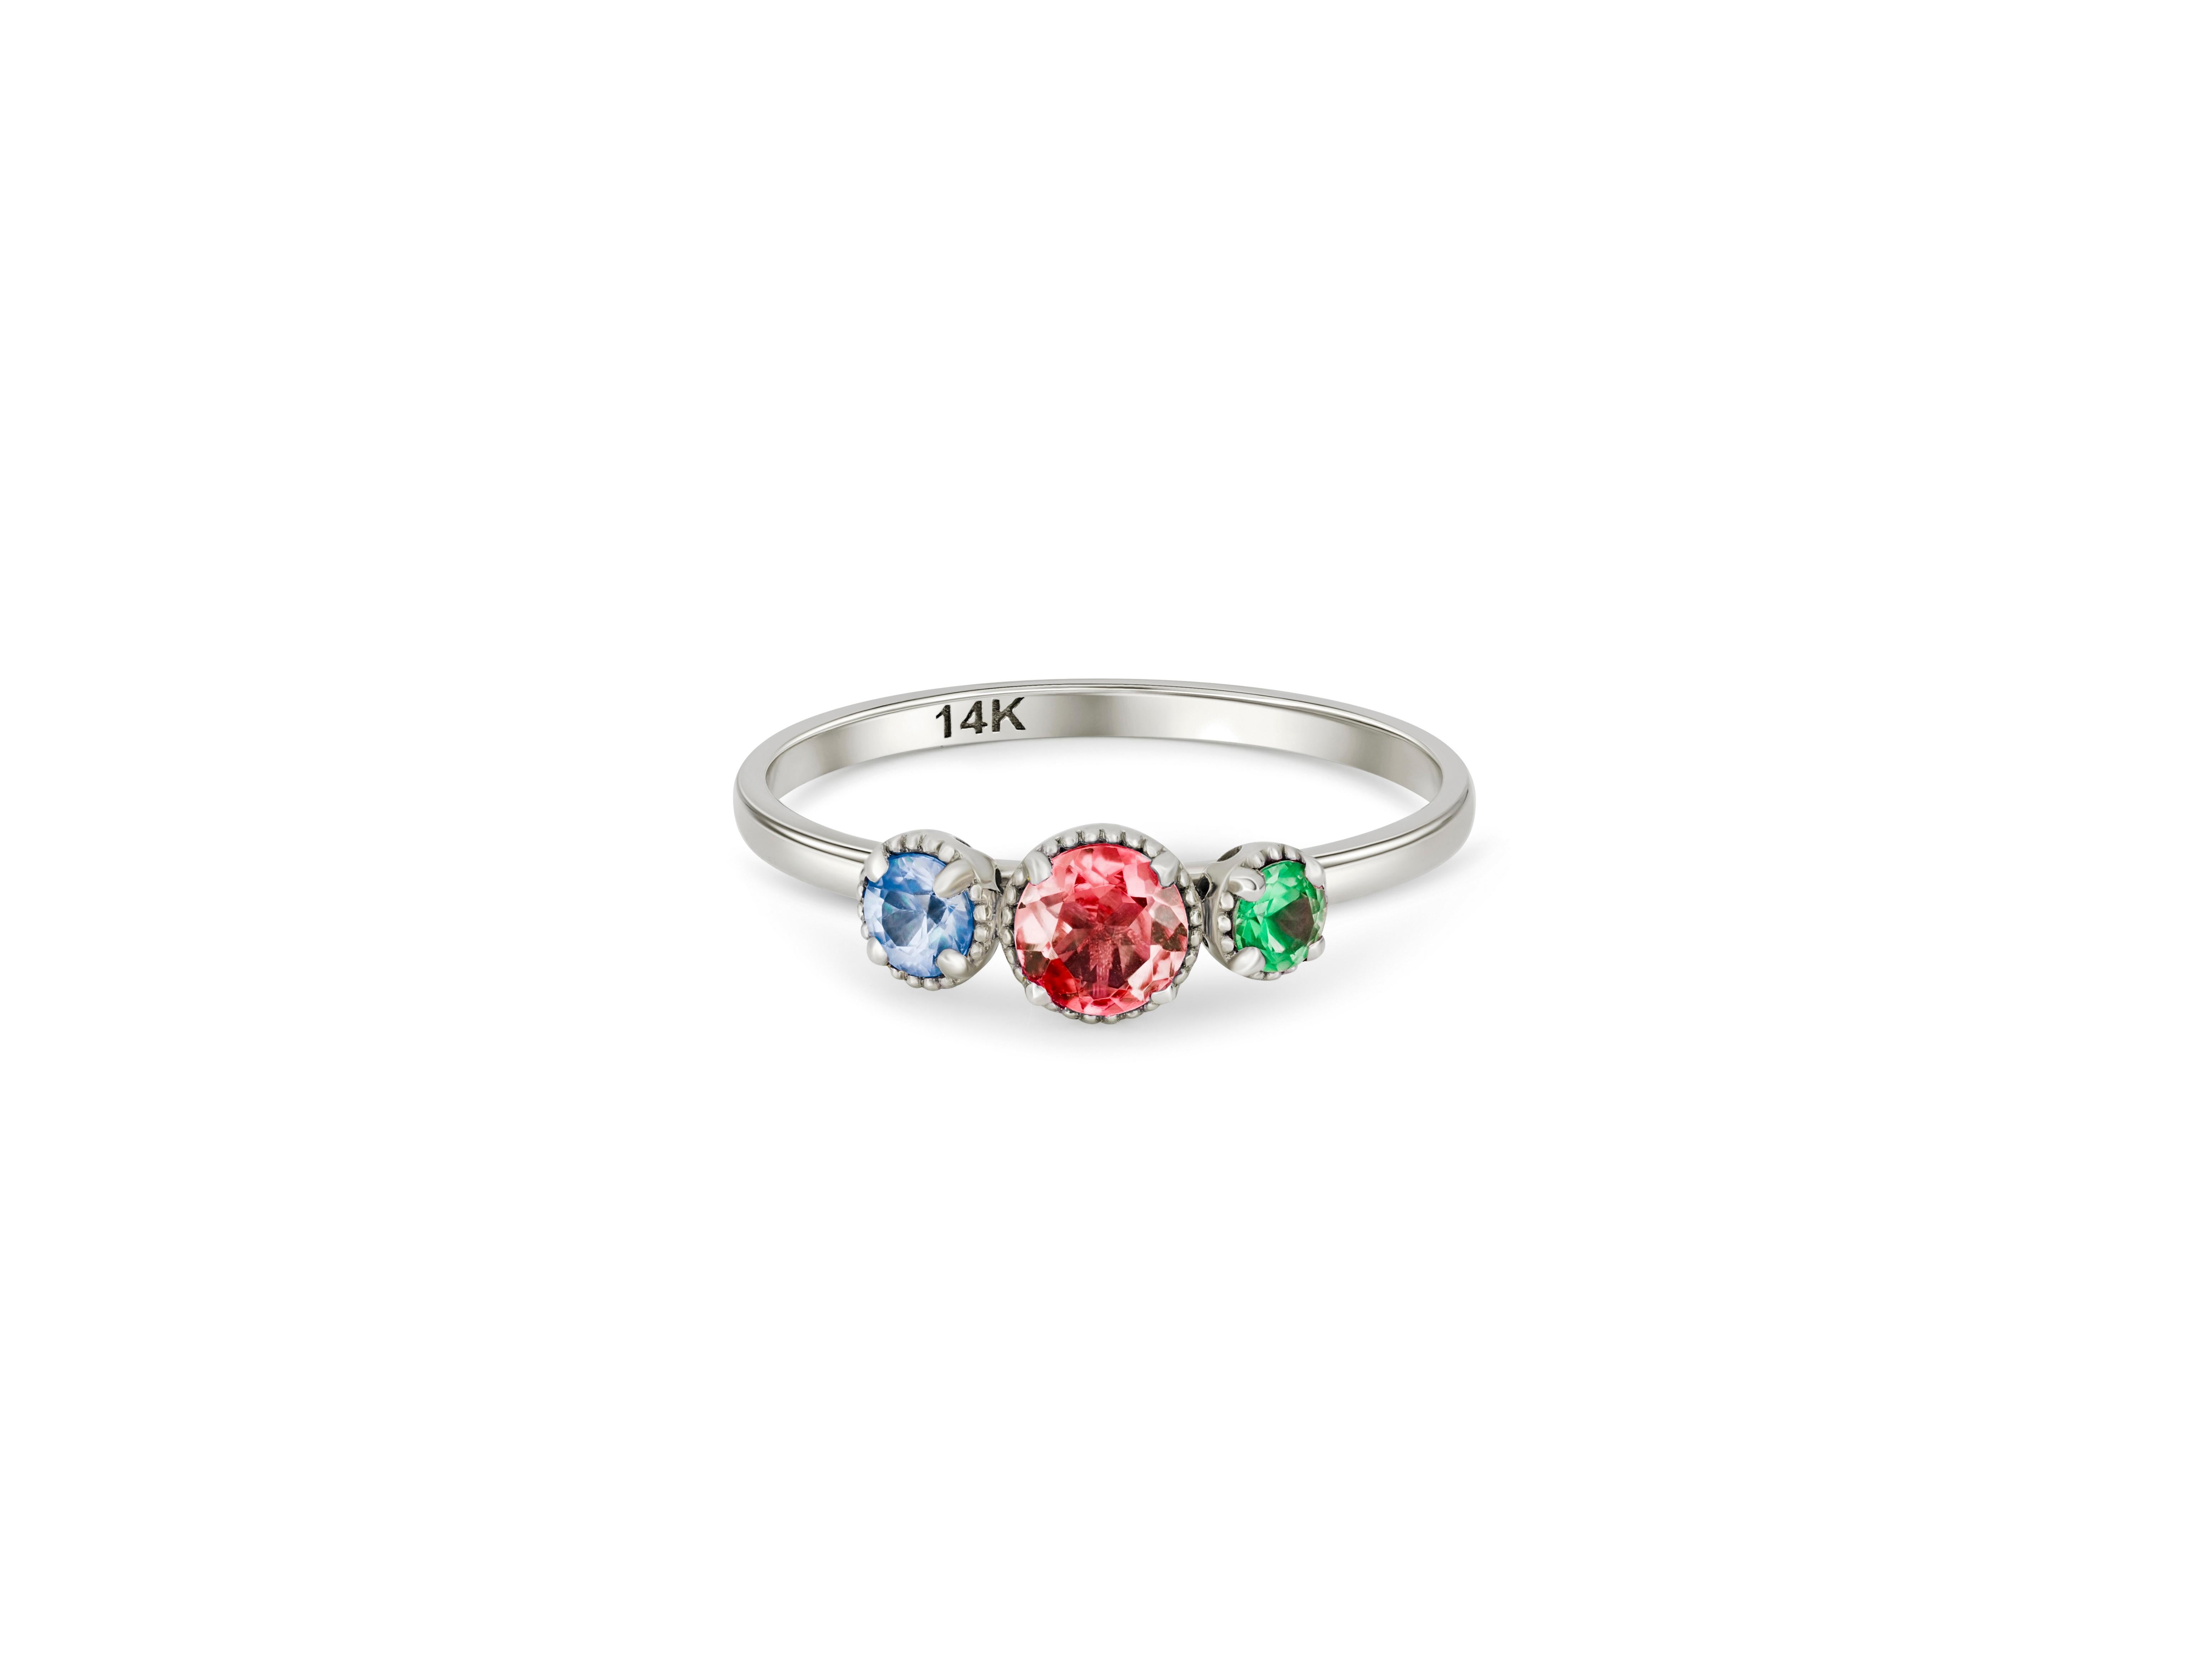 Trio gems 14k gold ring
3 gemstone palette 14k gold ring.  Topaz, ruby, emerald 14k gold ring.  Color contrast gold ring. Pink, blue and green gemstone ring. 

Metal: 14k gold
Weight: 1.8 gr depends from size

Gemstones:
Blue: lab topaz, round